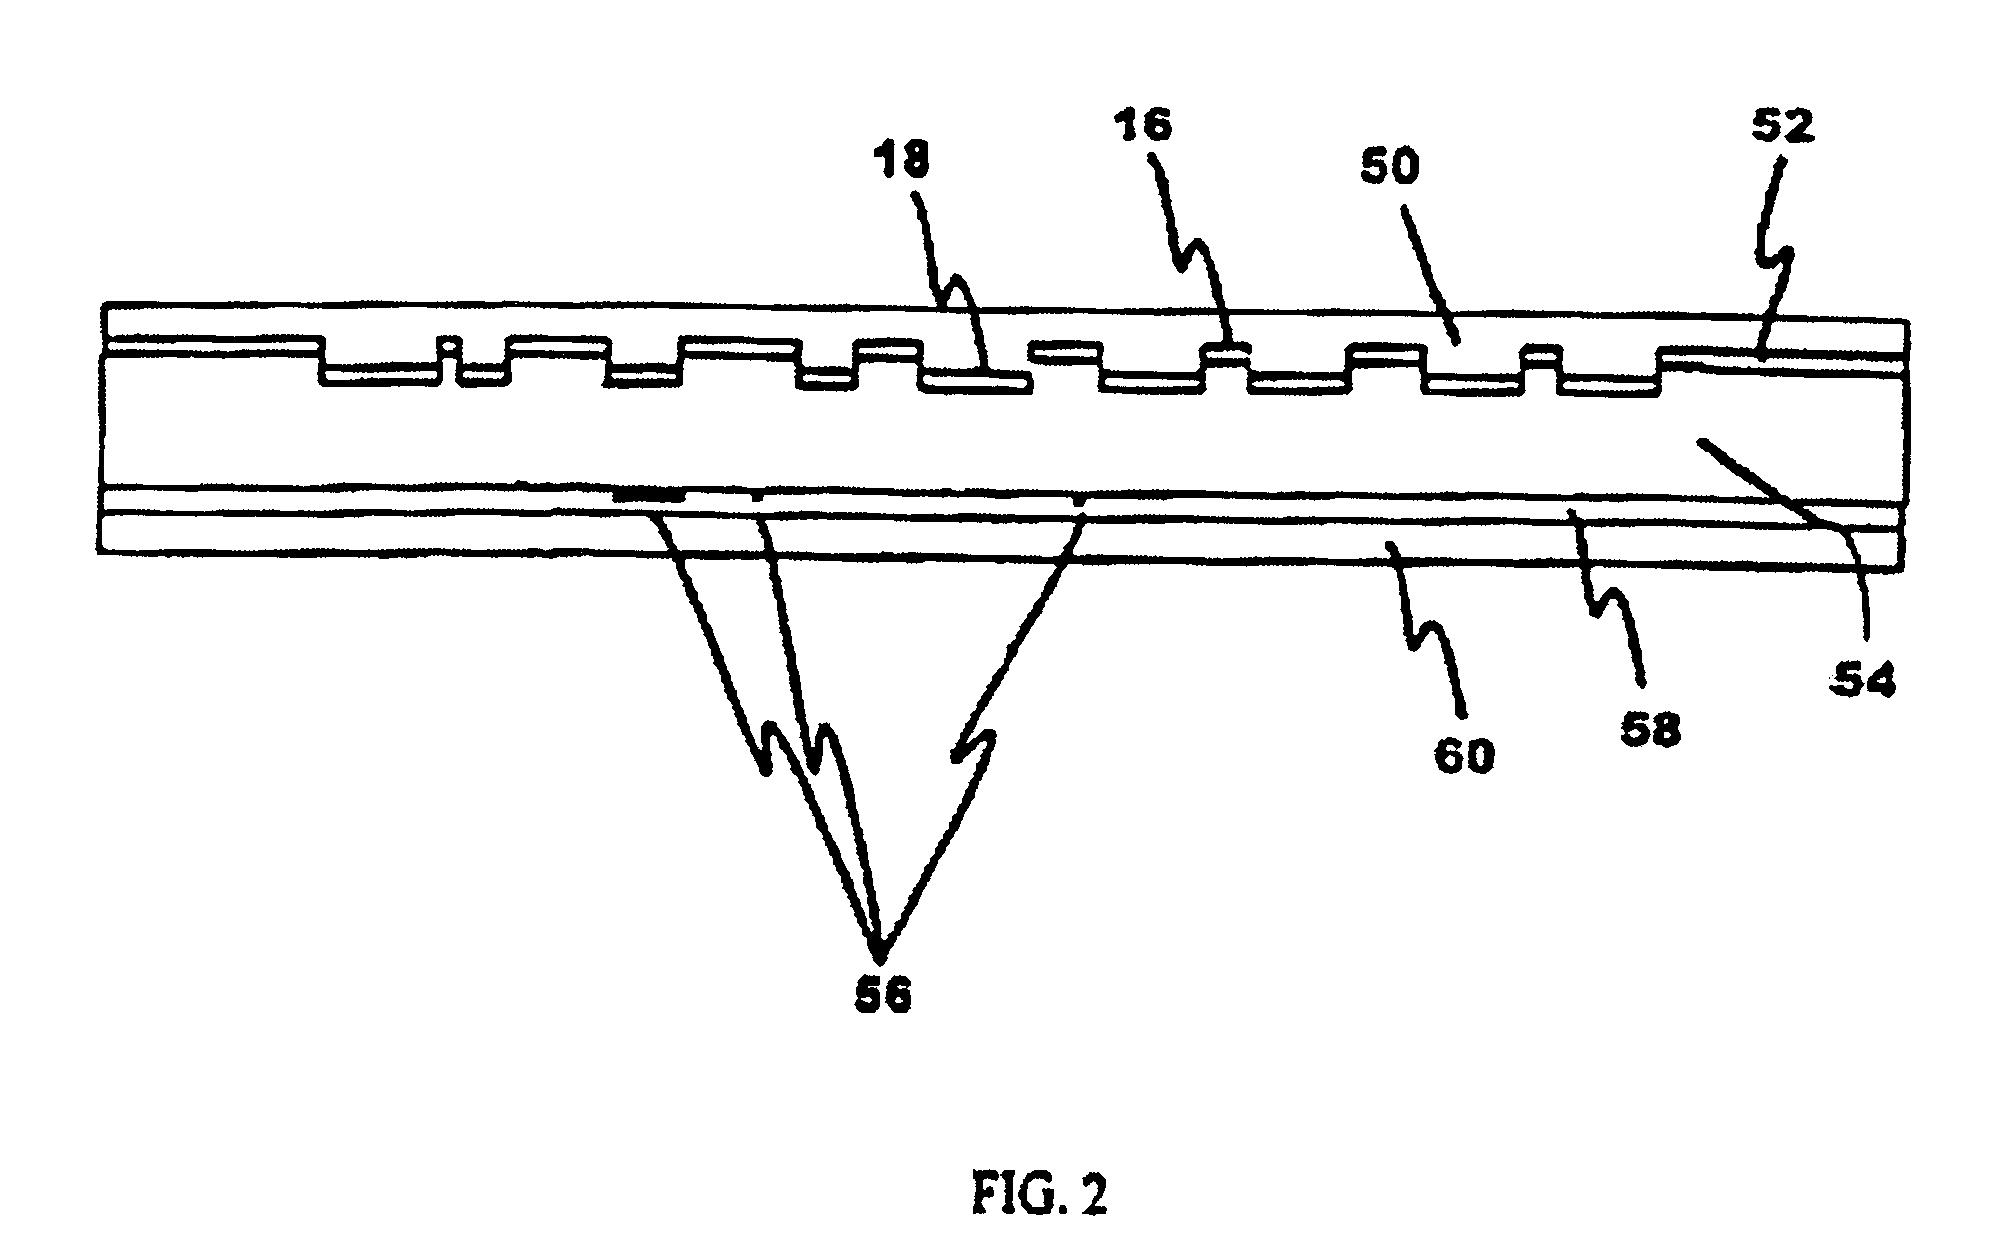 Copy-protected optical media and method of manufacture thereof